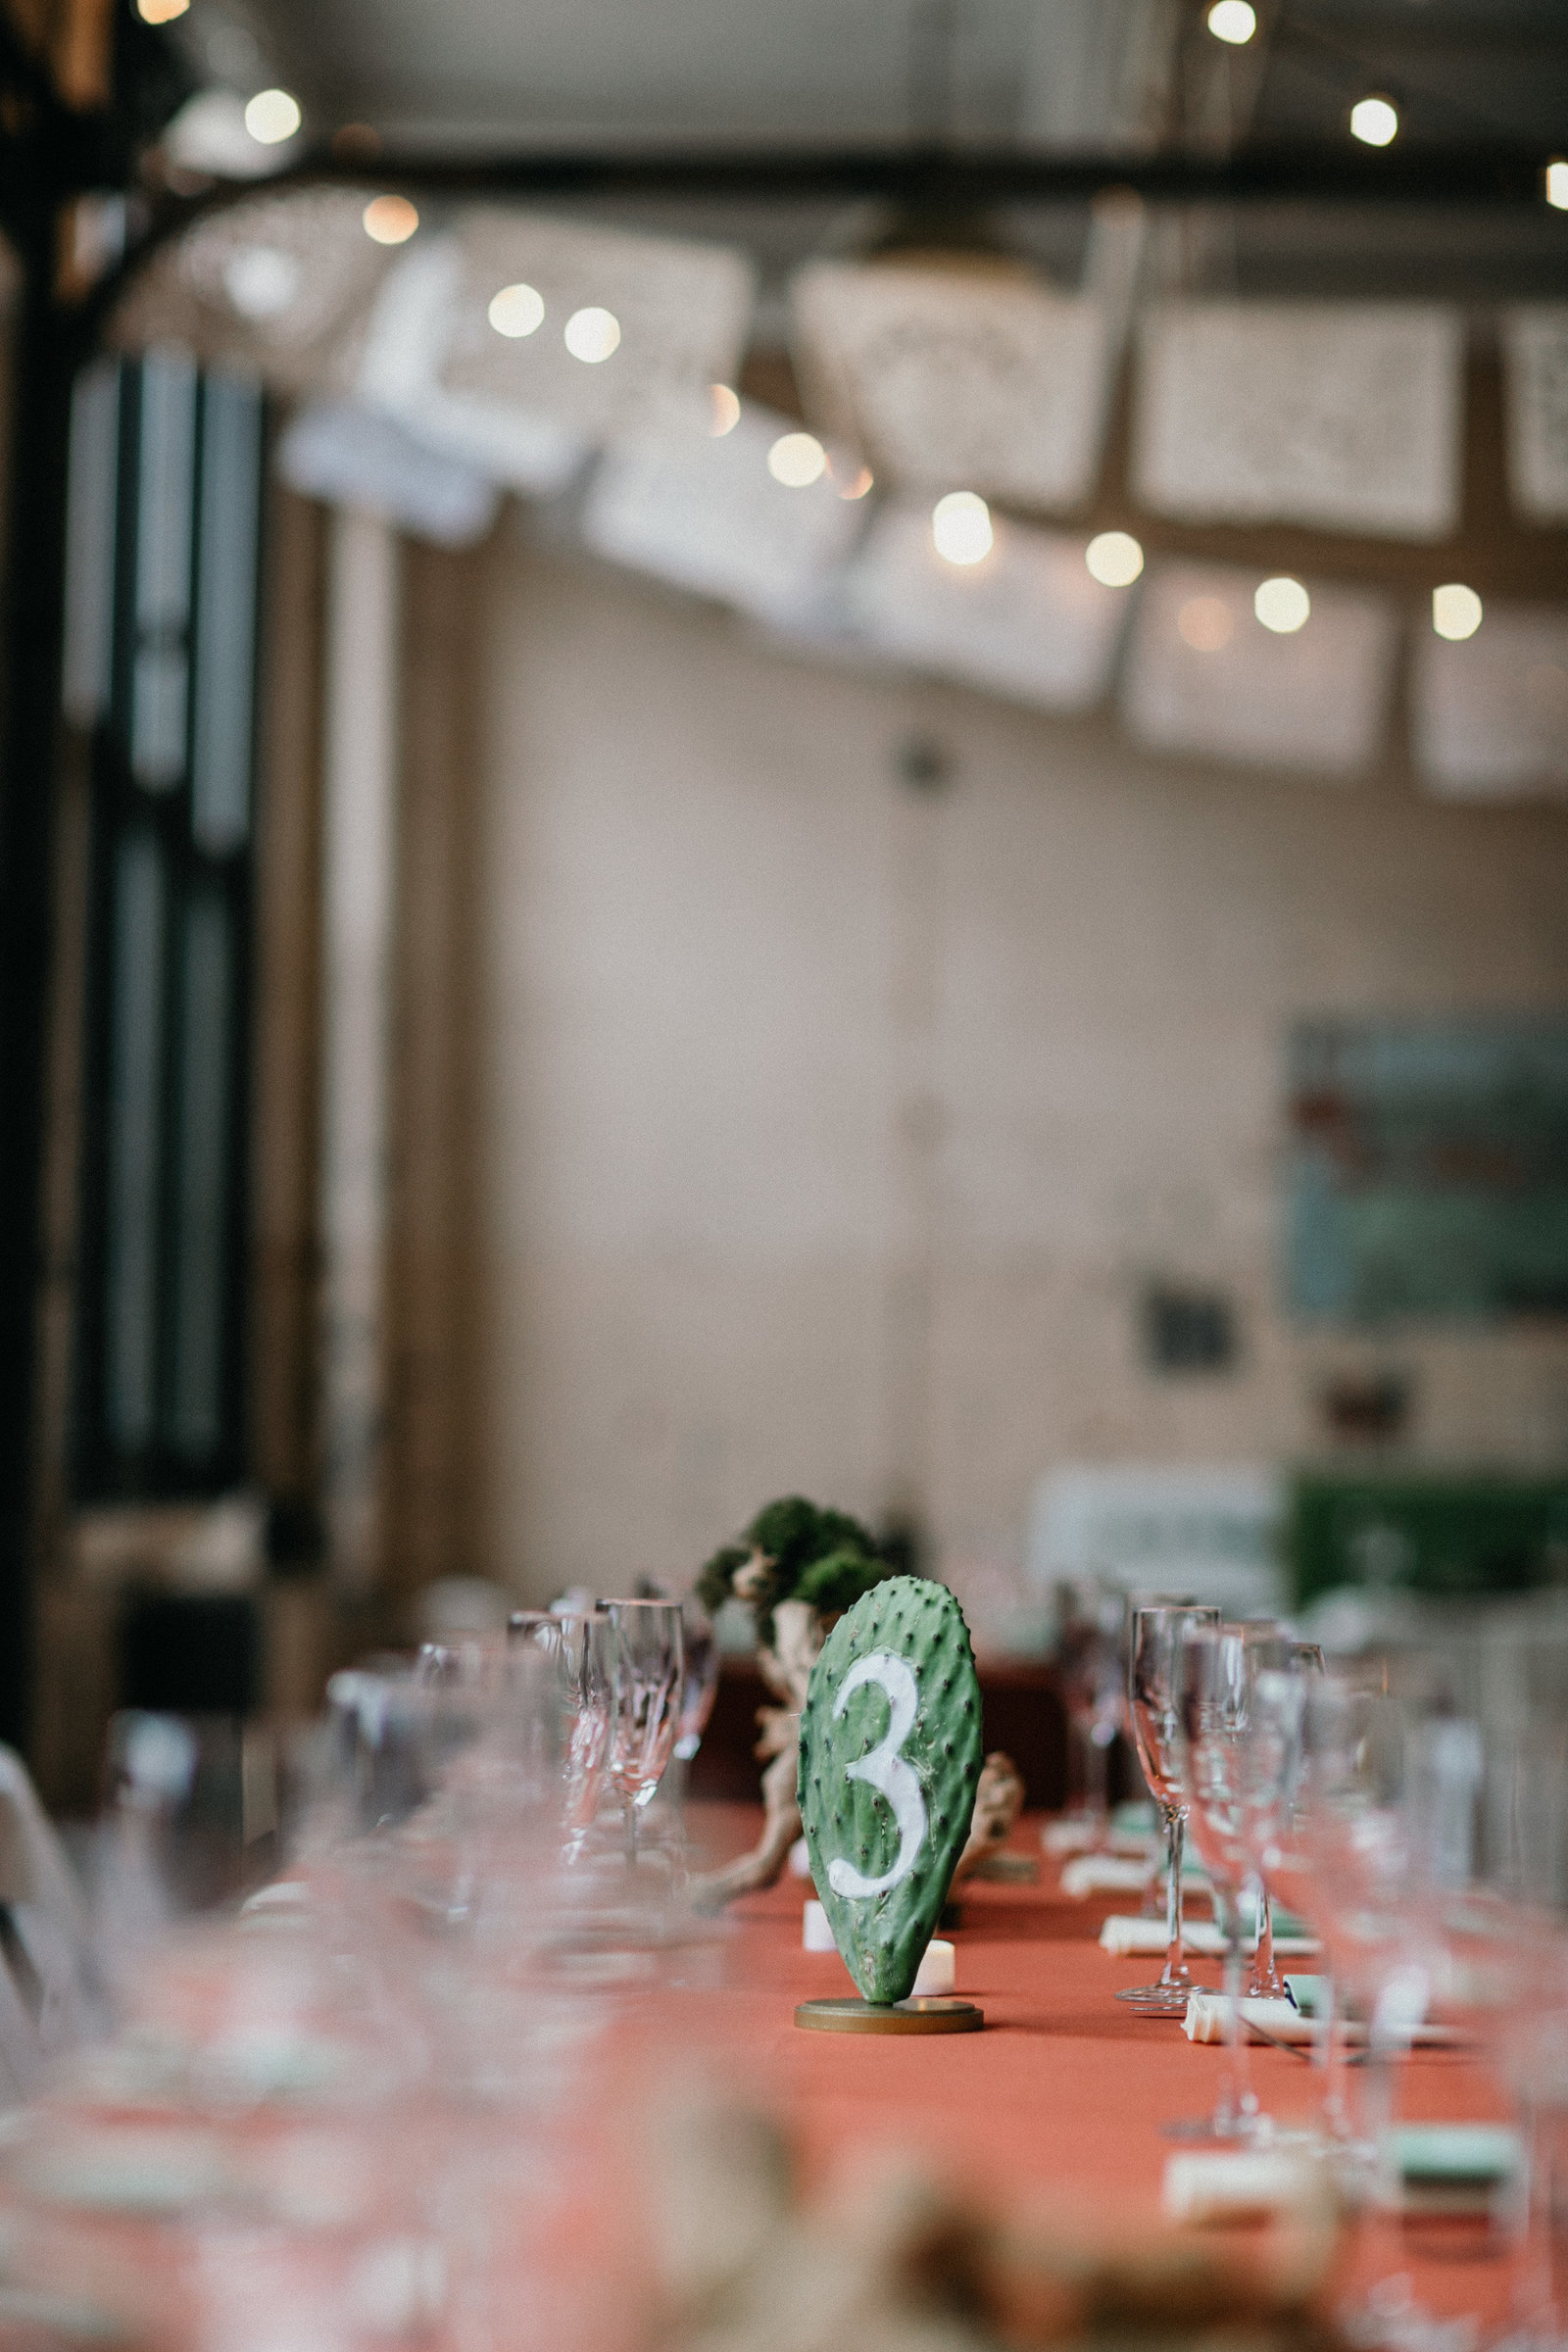 Hand painted cactus table pieces, in this industrial Philadelphia wedding venue.